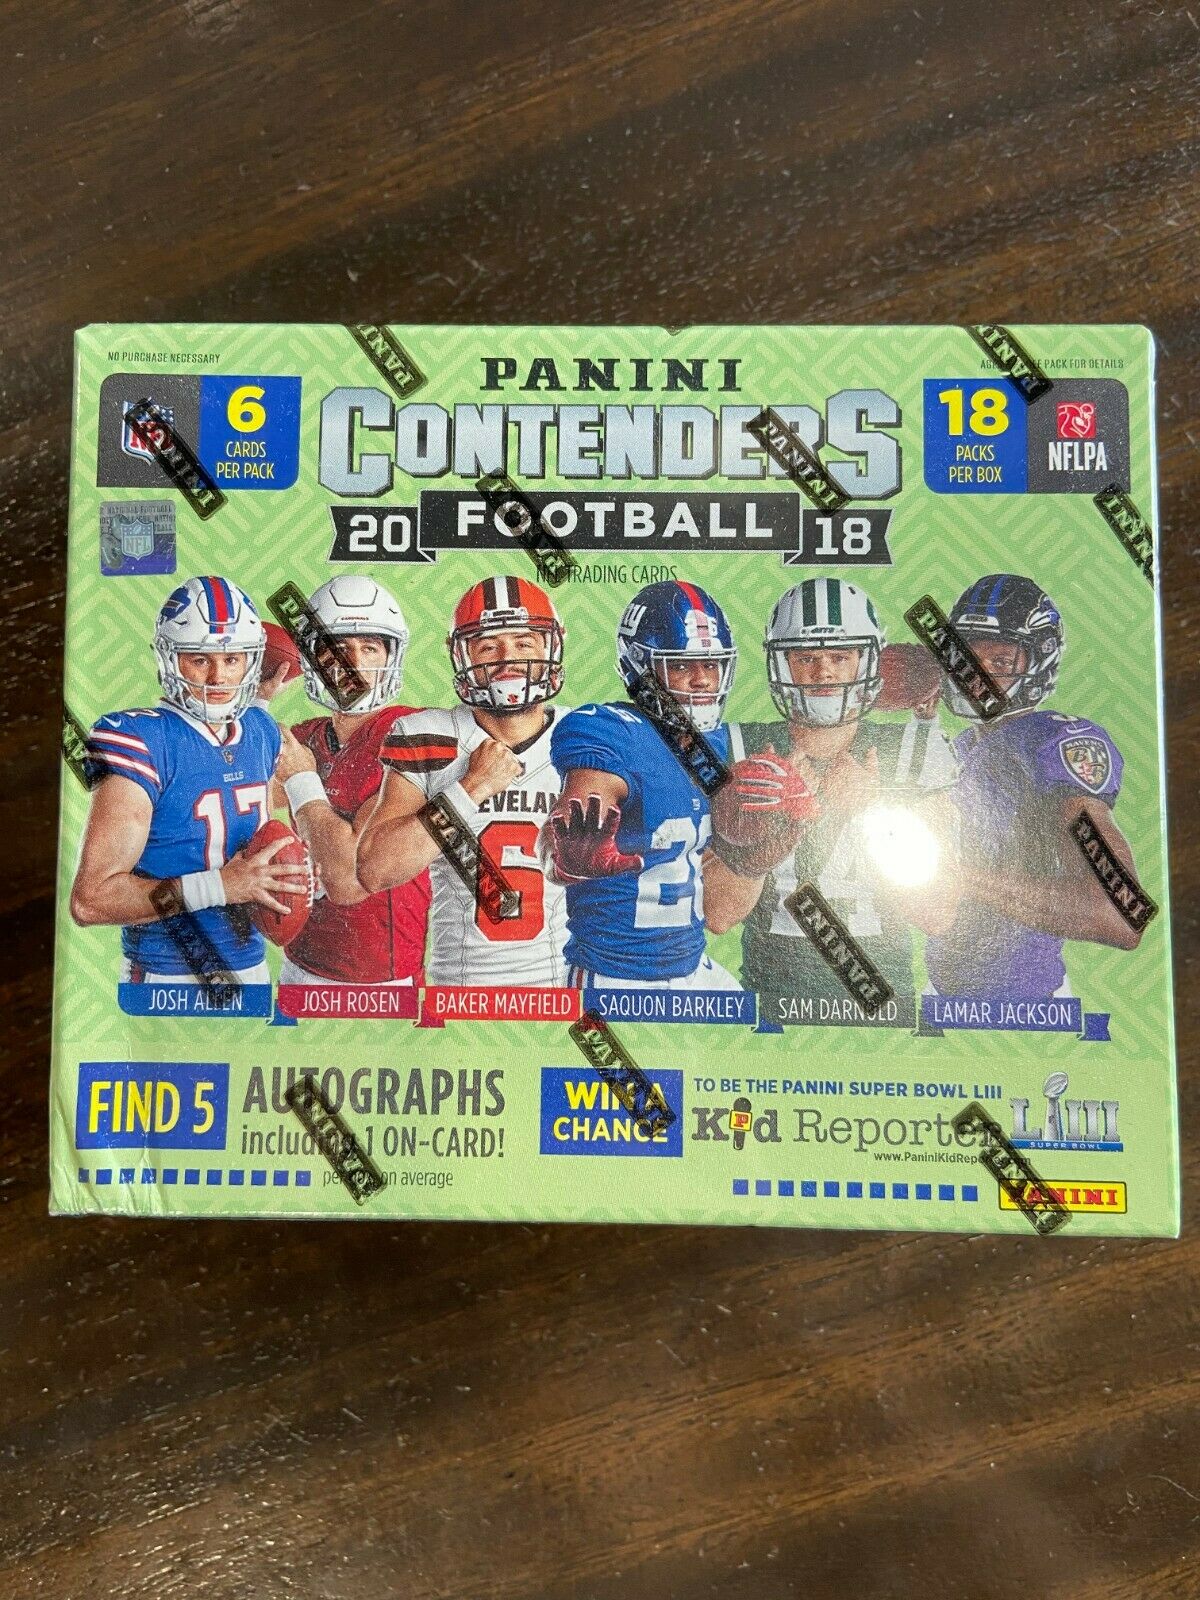 2018 Panini Contenders Football Hobby Box Darnold Mayfield Allen Rookie PSA 10